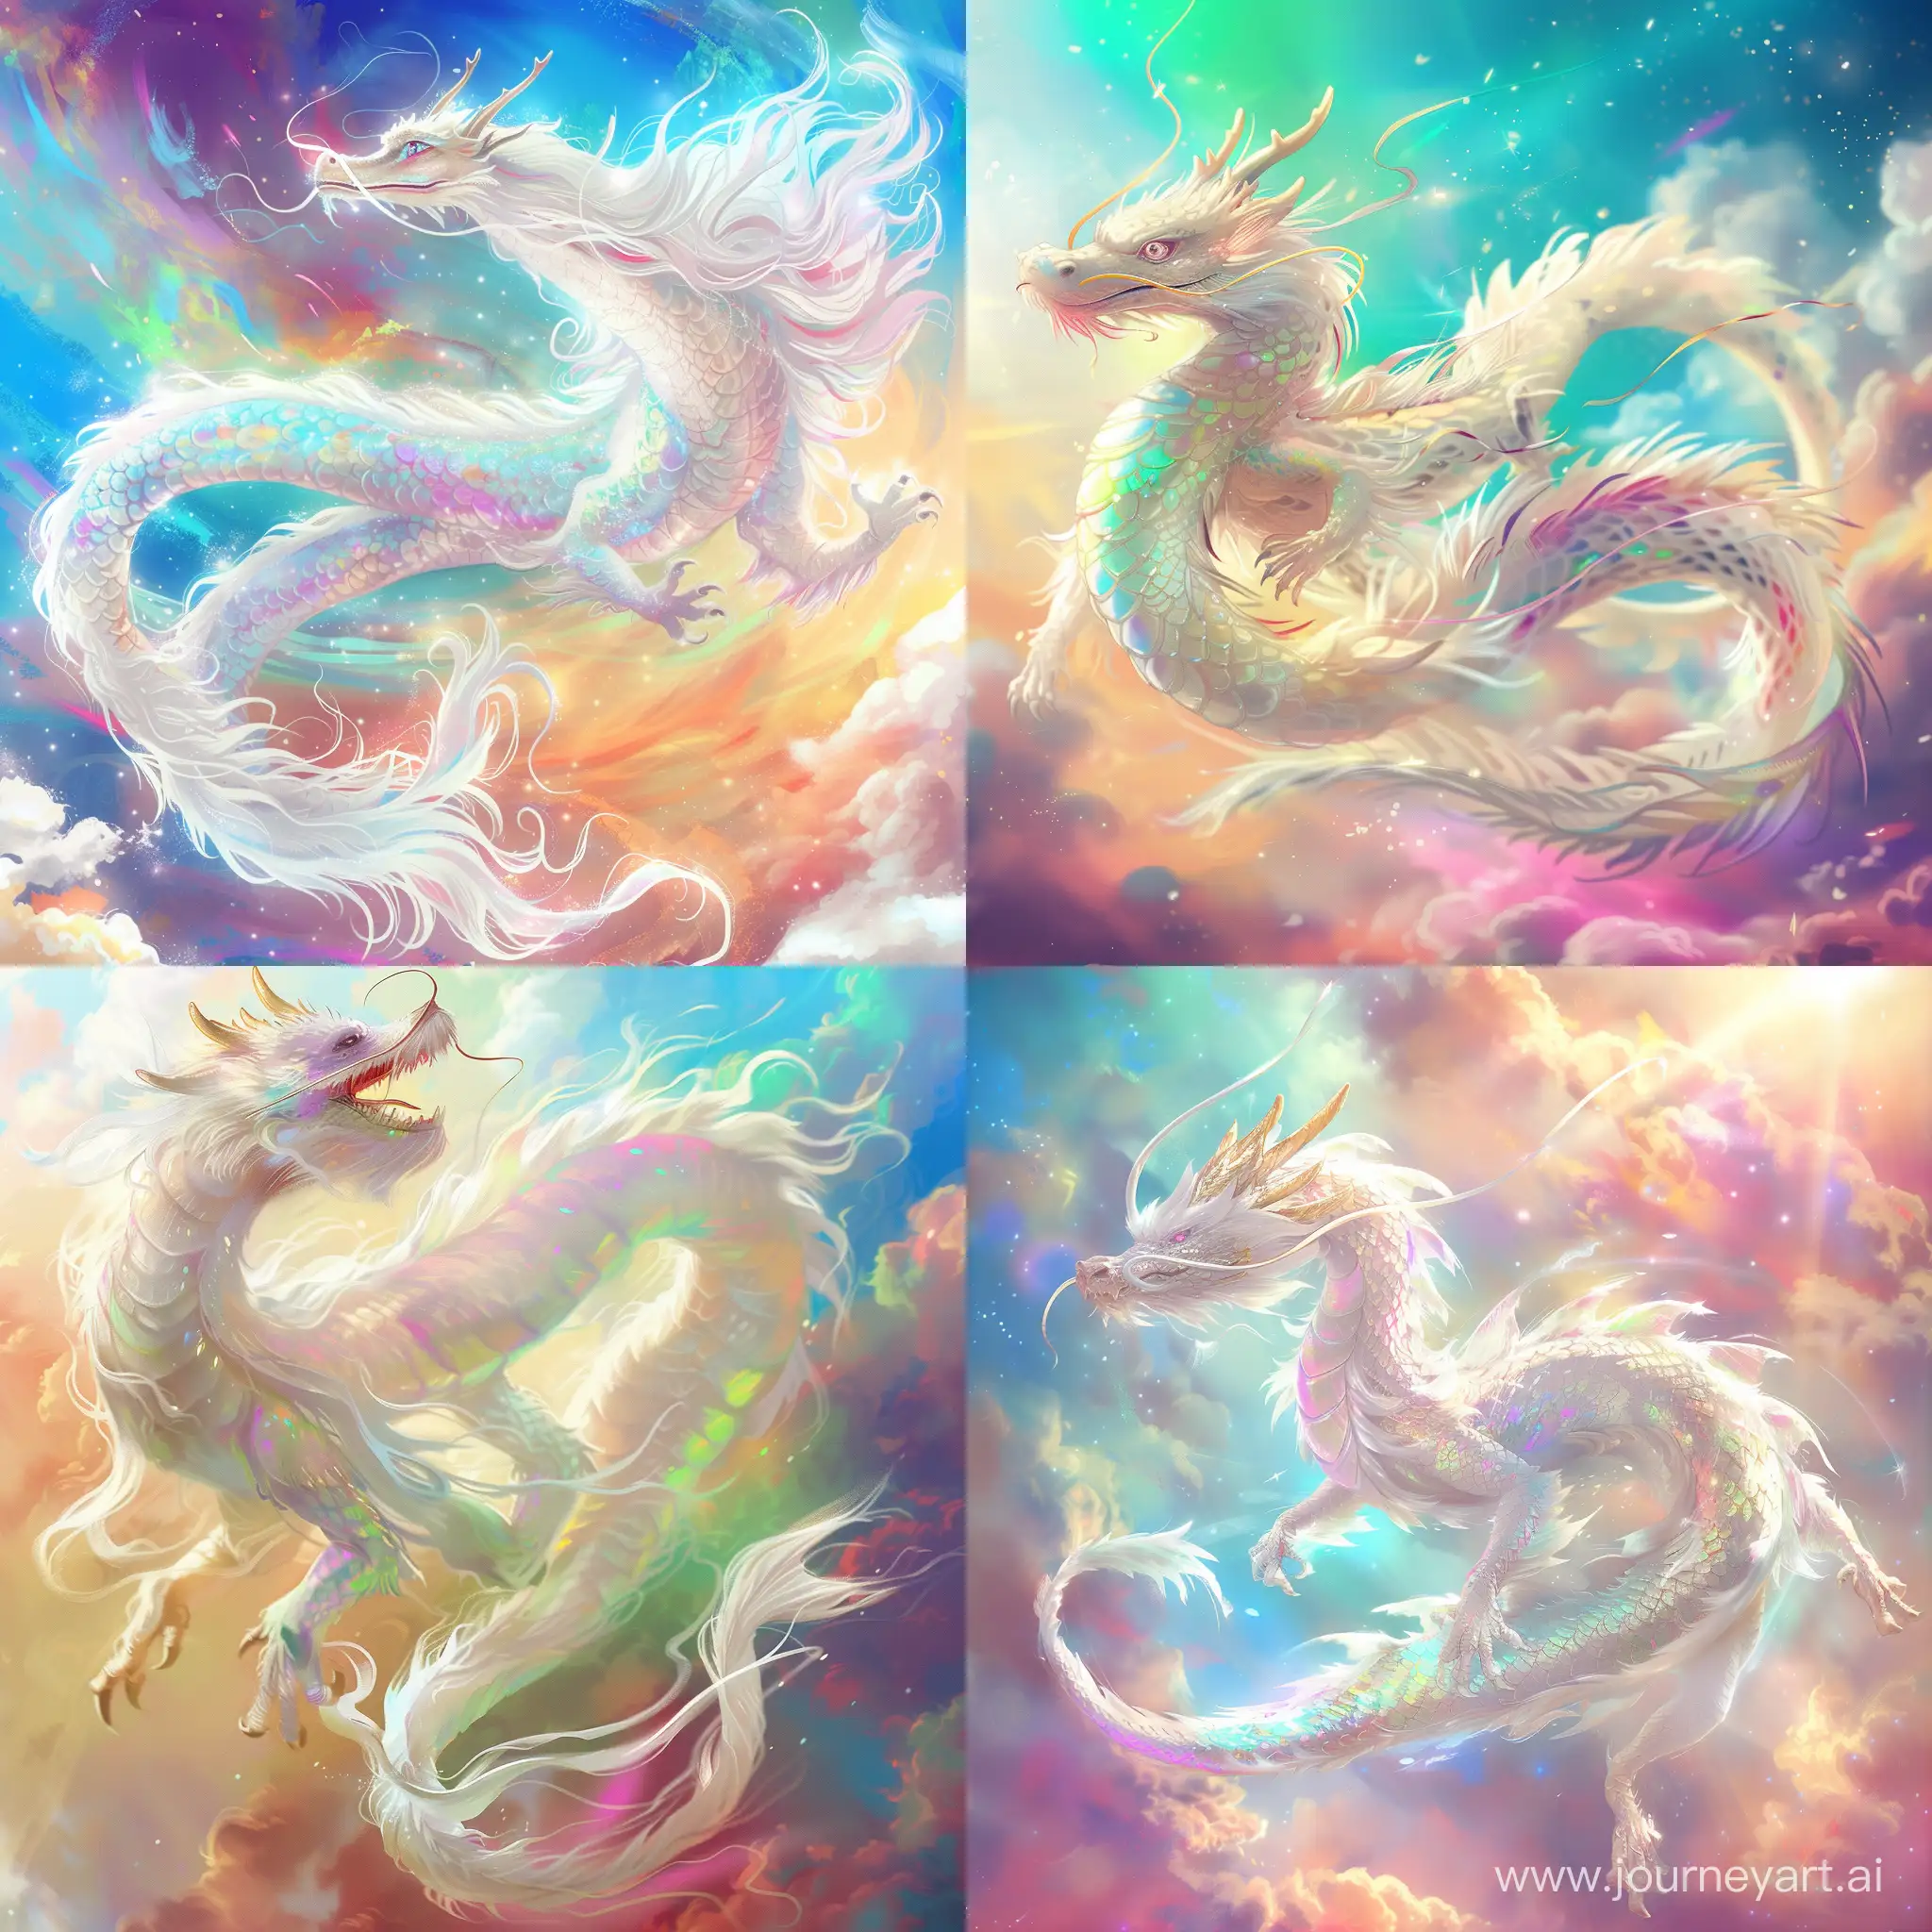 Luscious flowy white kind looking chinese dragon with iridescent hues. Flying in a colorful bright sky, stands out from the background